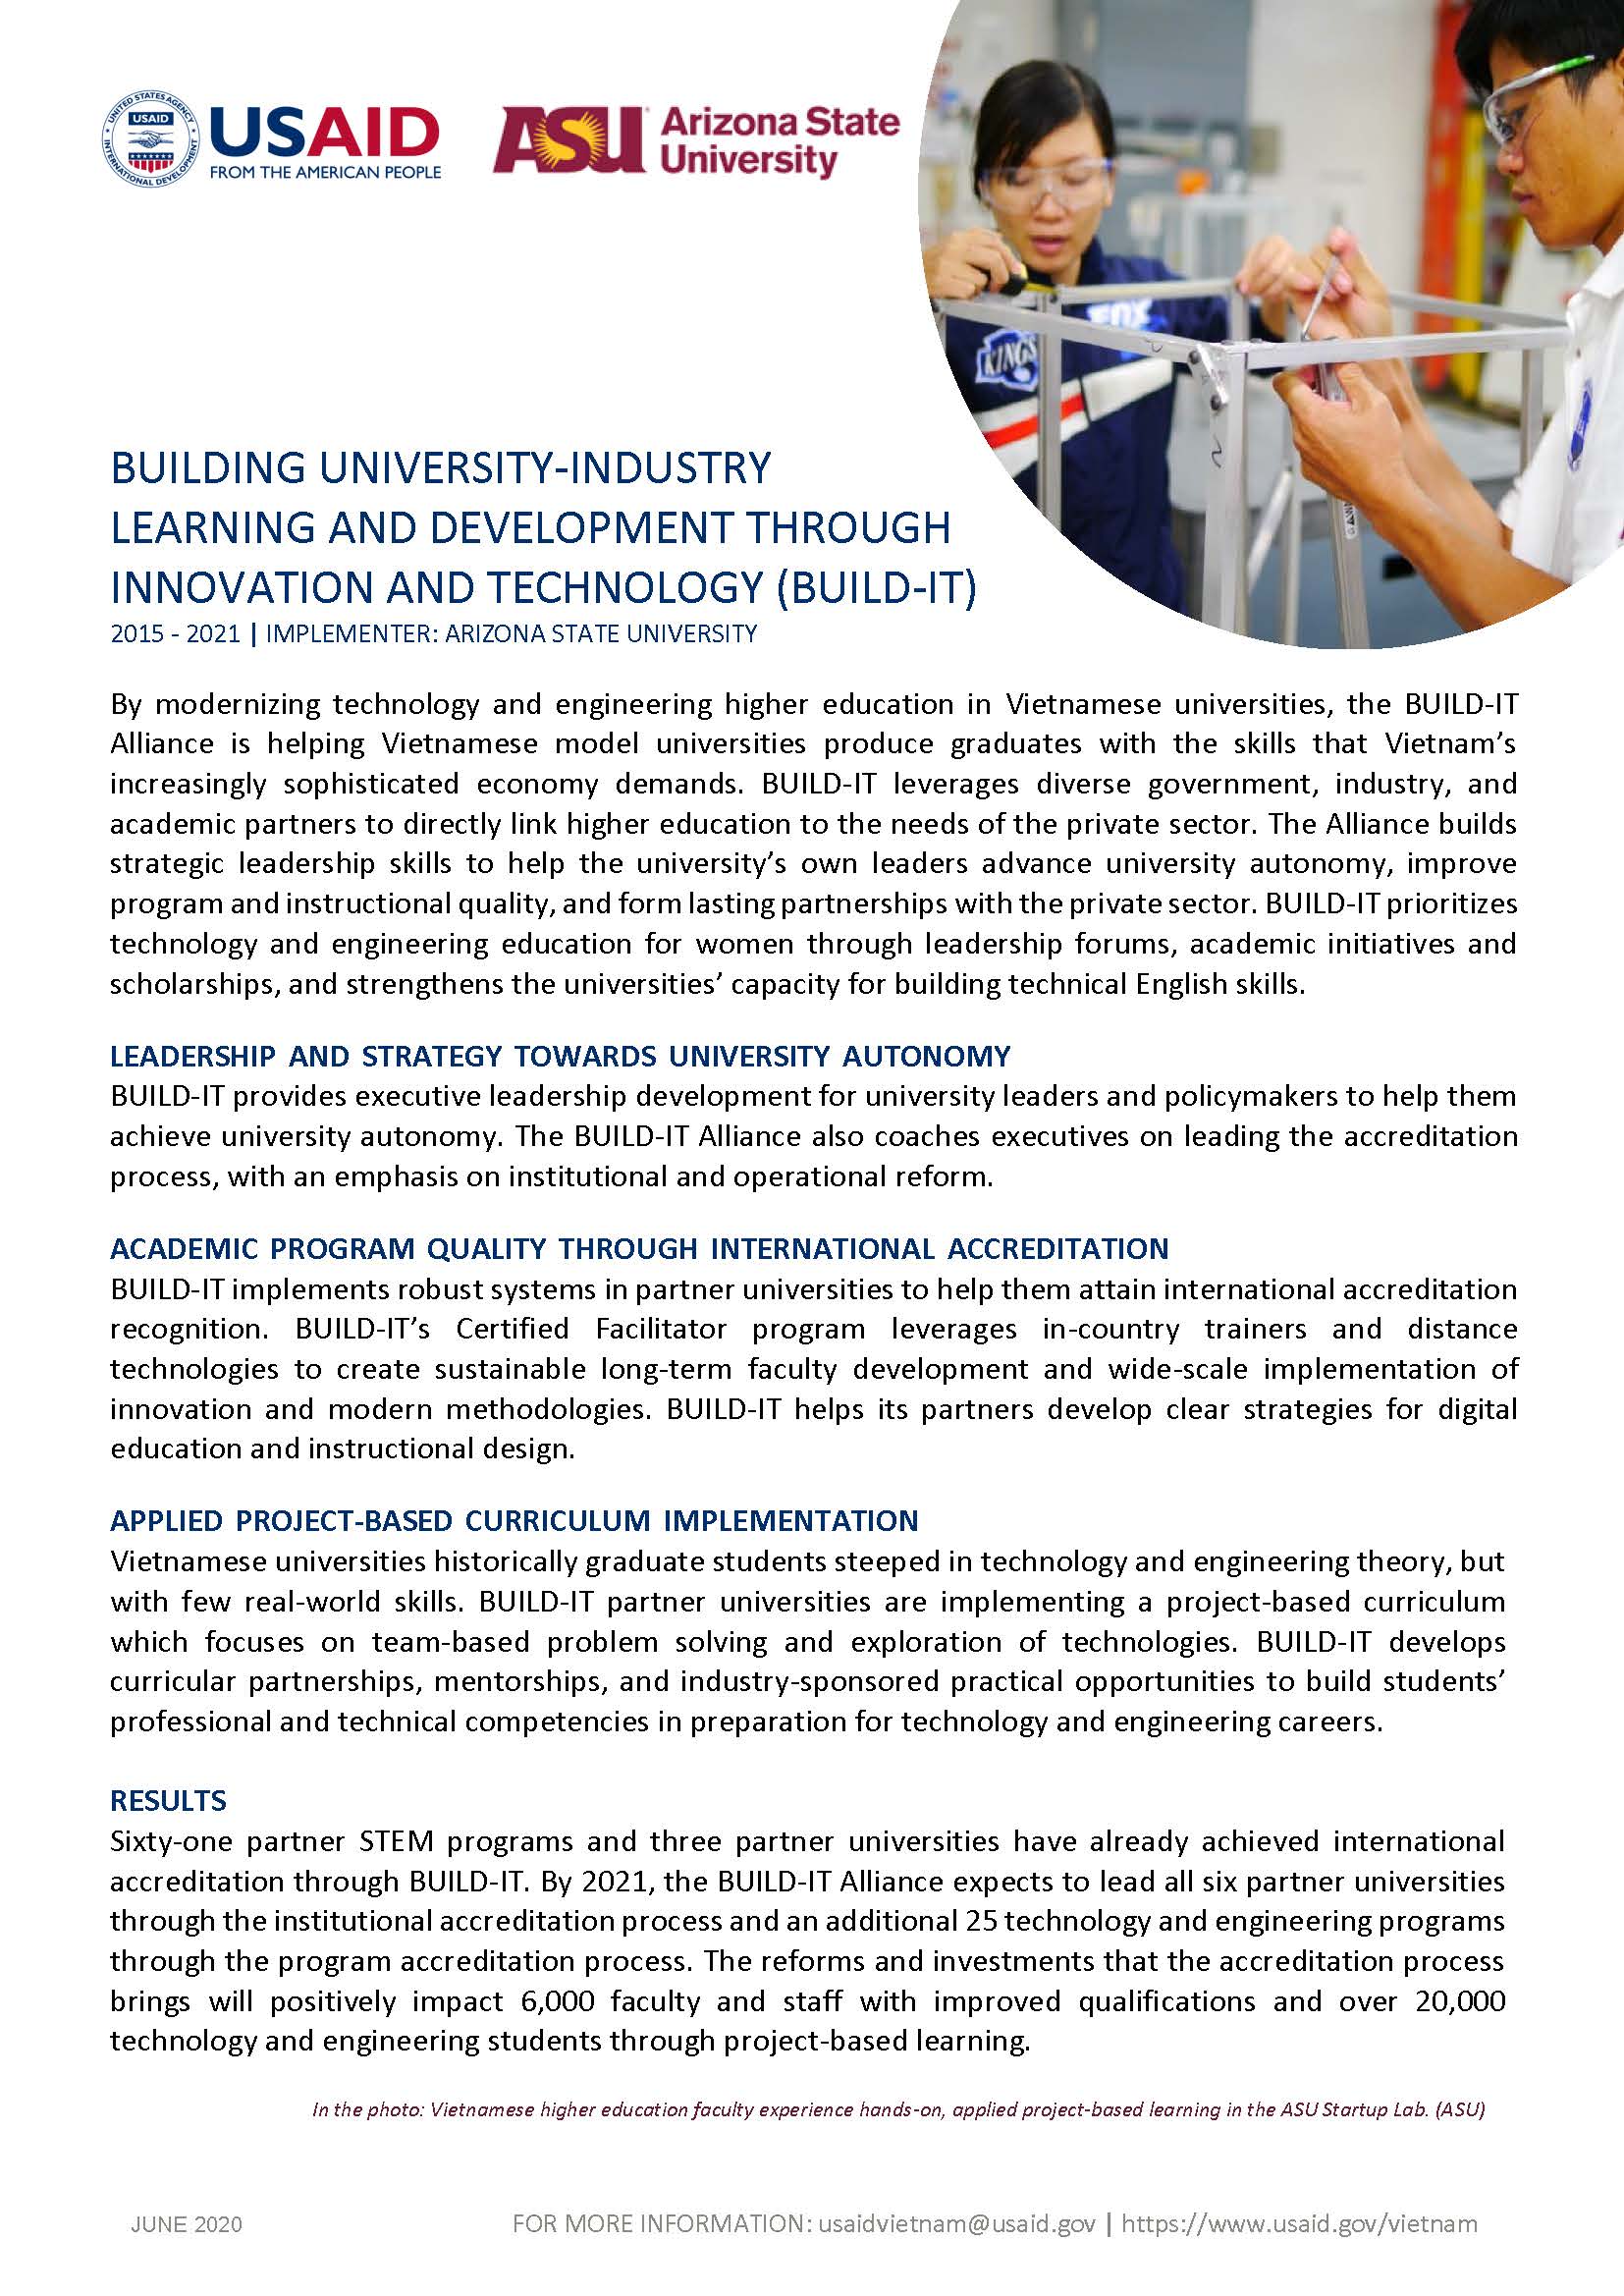 Fact Sheet: Building University-Industry Learning and Development Through Innovation and Technology (BUILD-IT)